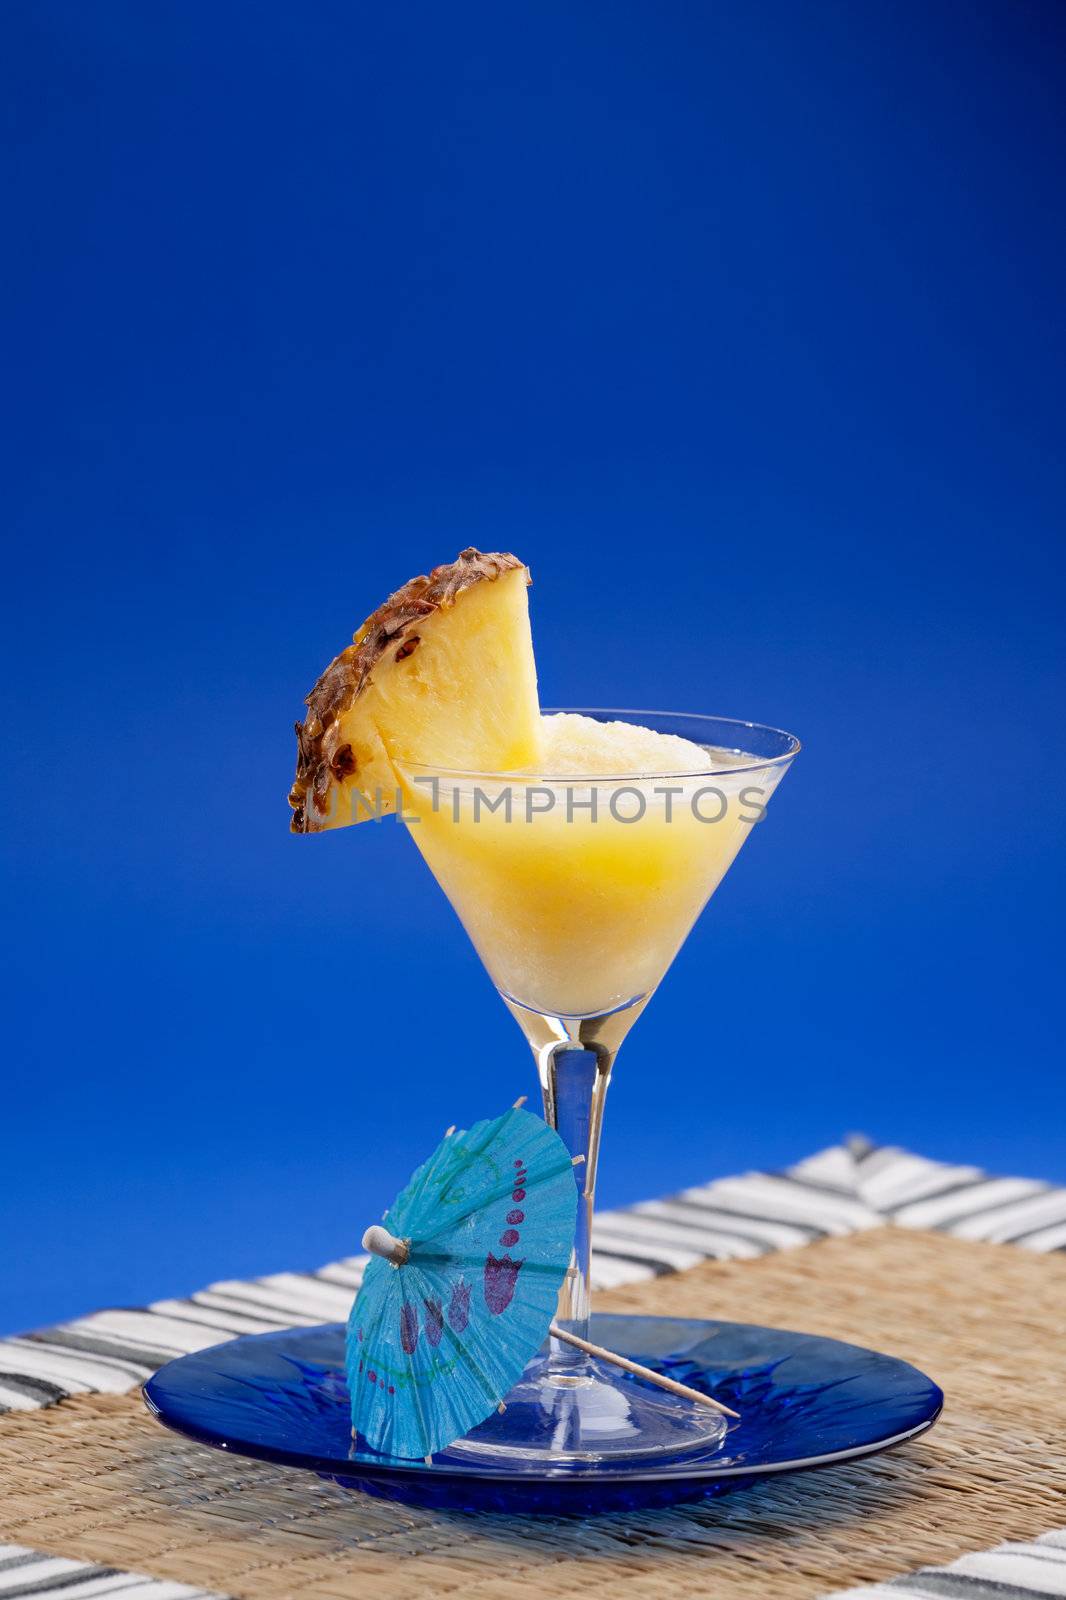 A refreshing summer drunk - pina colada over a blue background